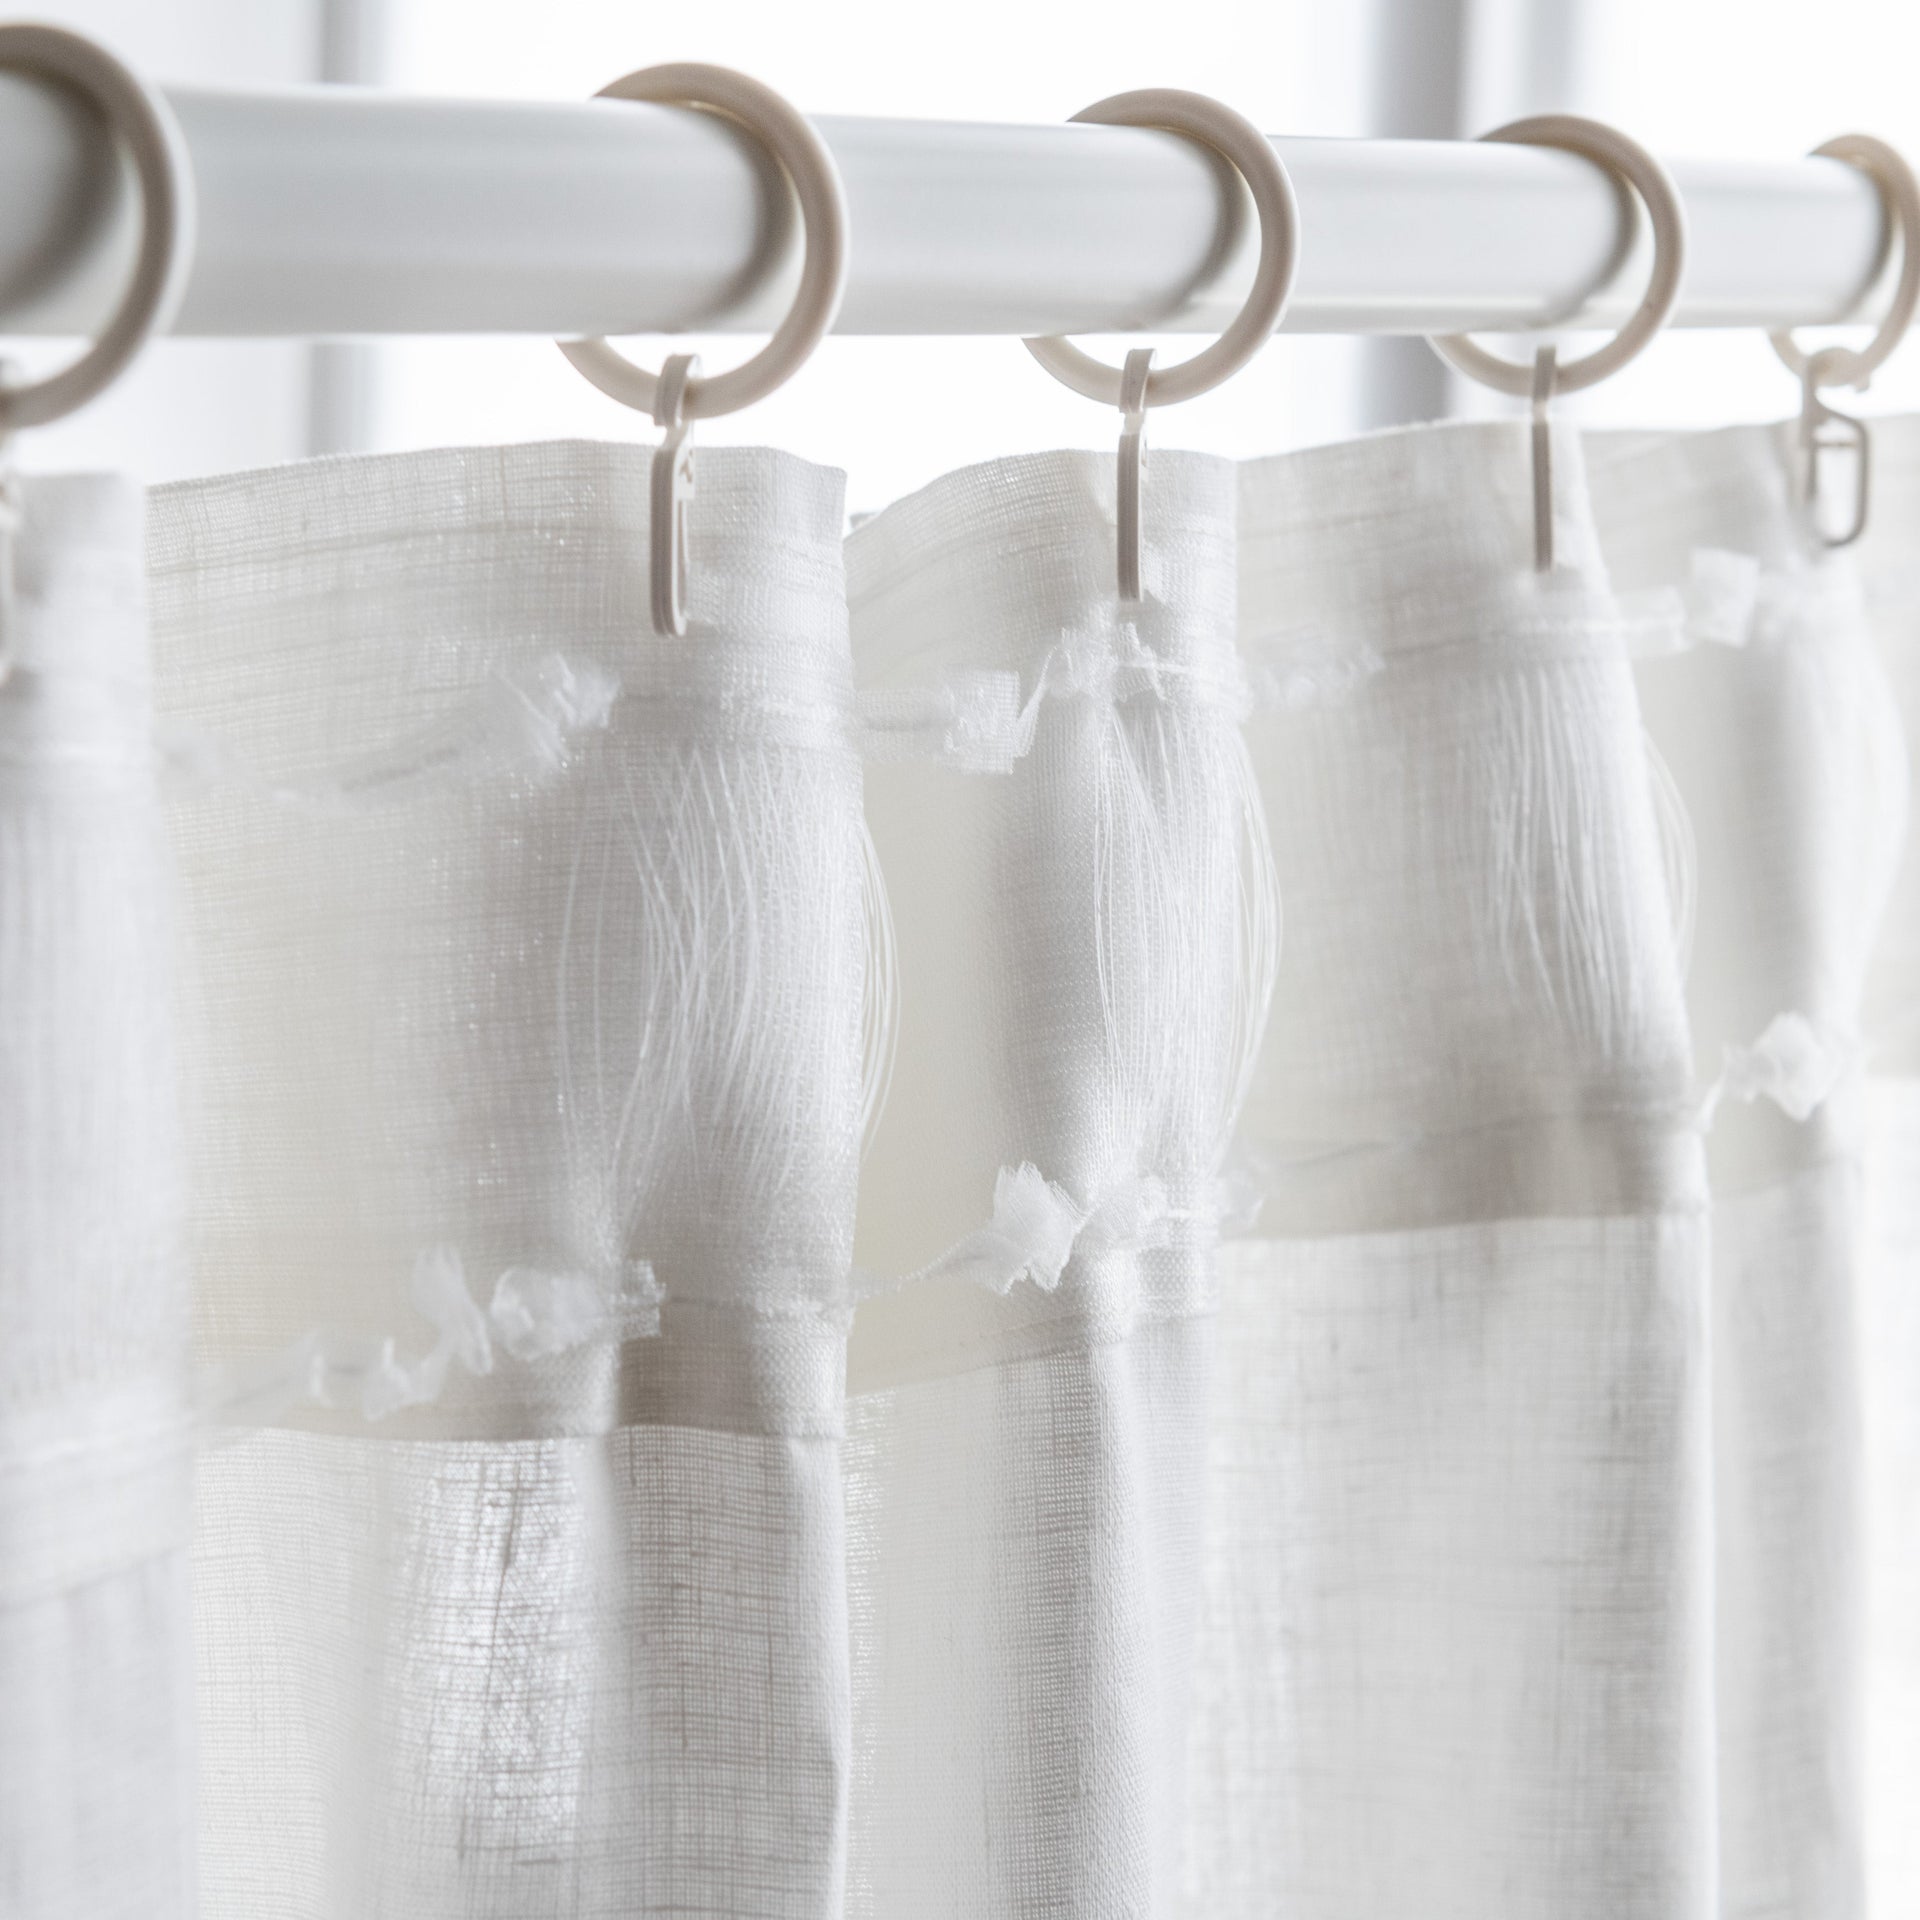 S-fold Linen Curtain Panel for Bay Window - Suitable for Rings, Hooks and Tracks